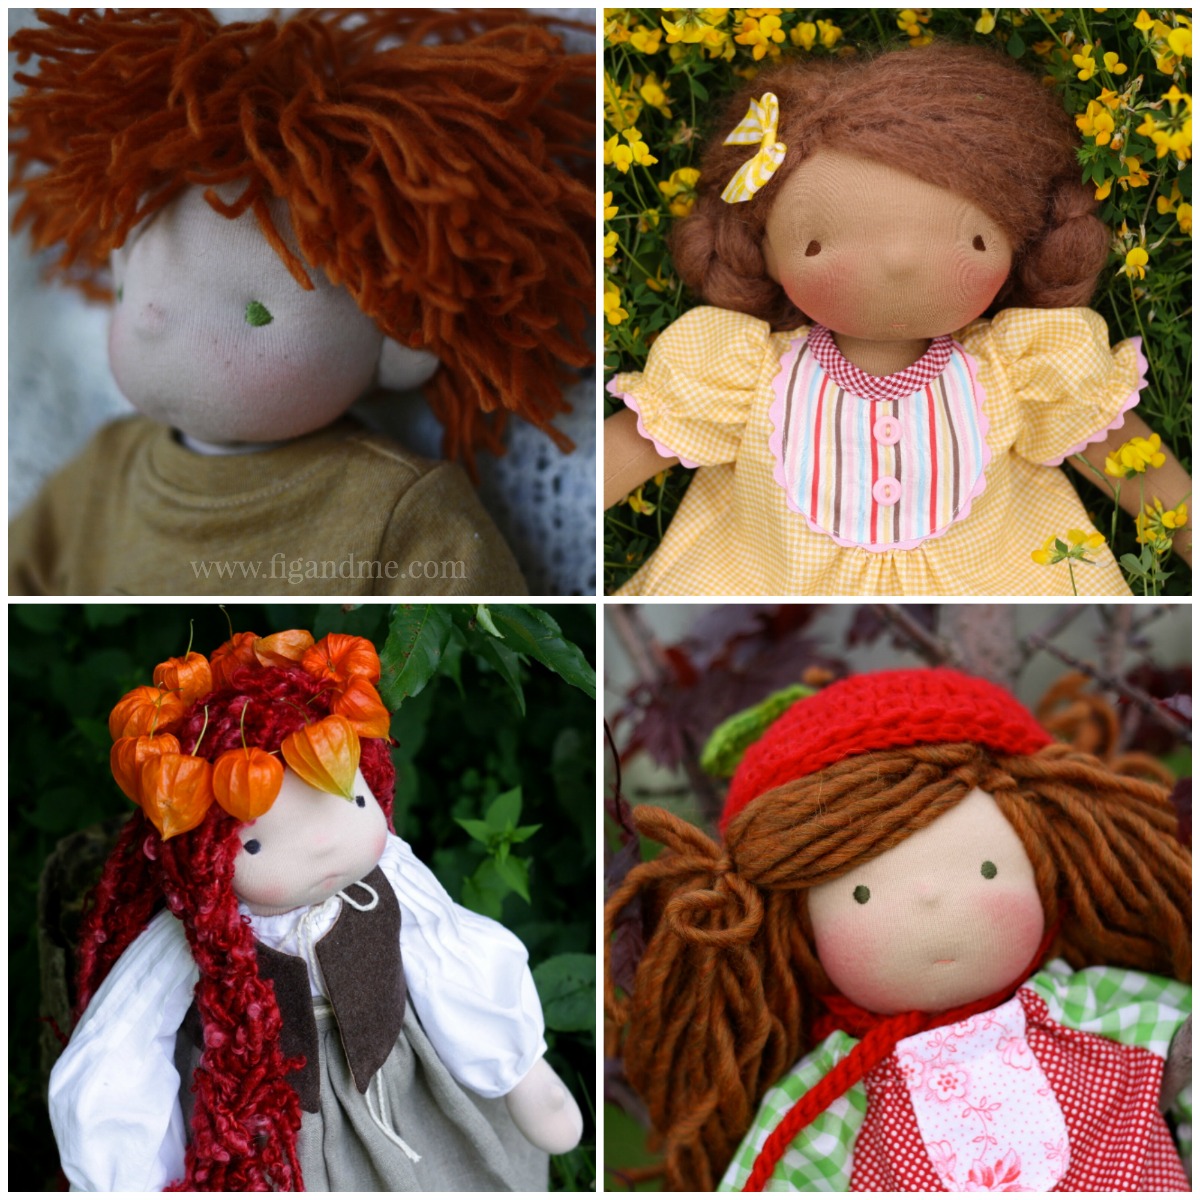 DIY DOLL HAIR OUT OF YARN, CHEAP AND EASY ALTERNATIVE FOR DOLL HAIR